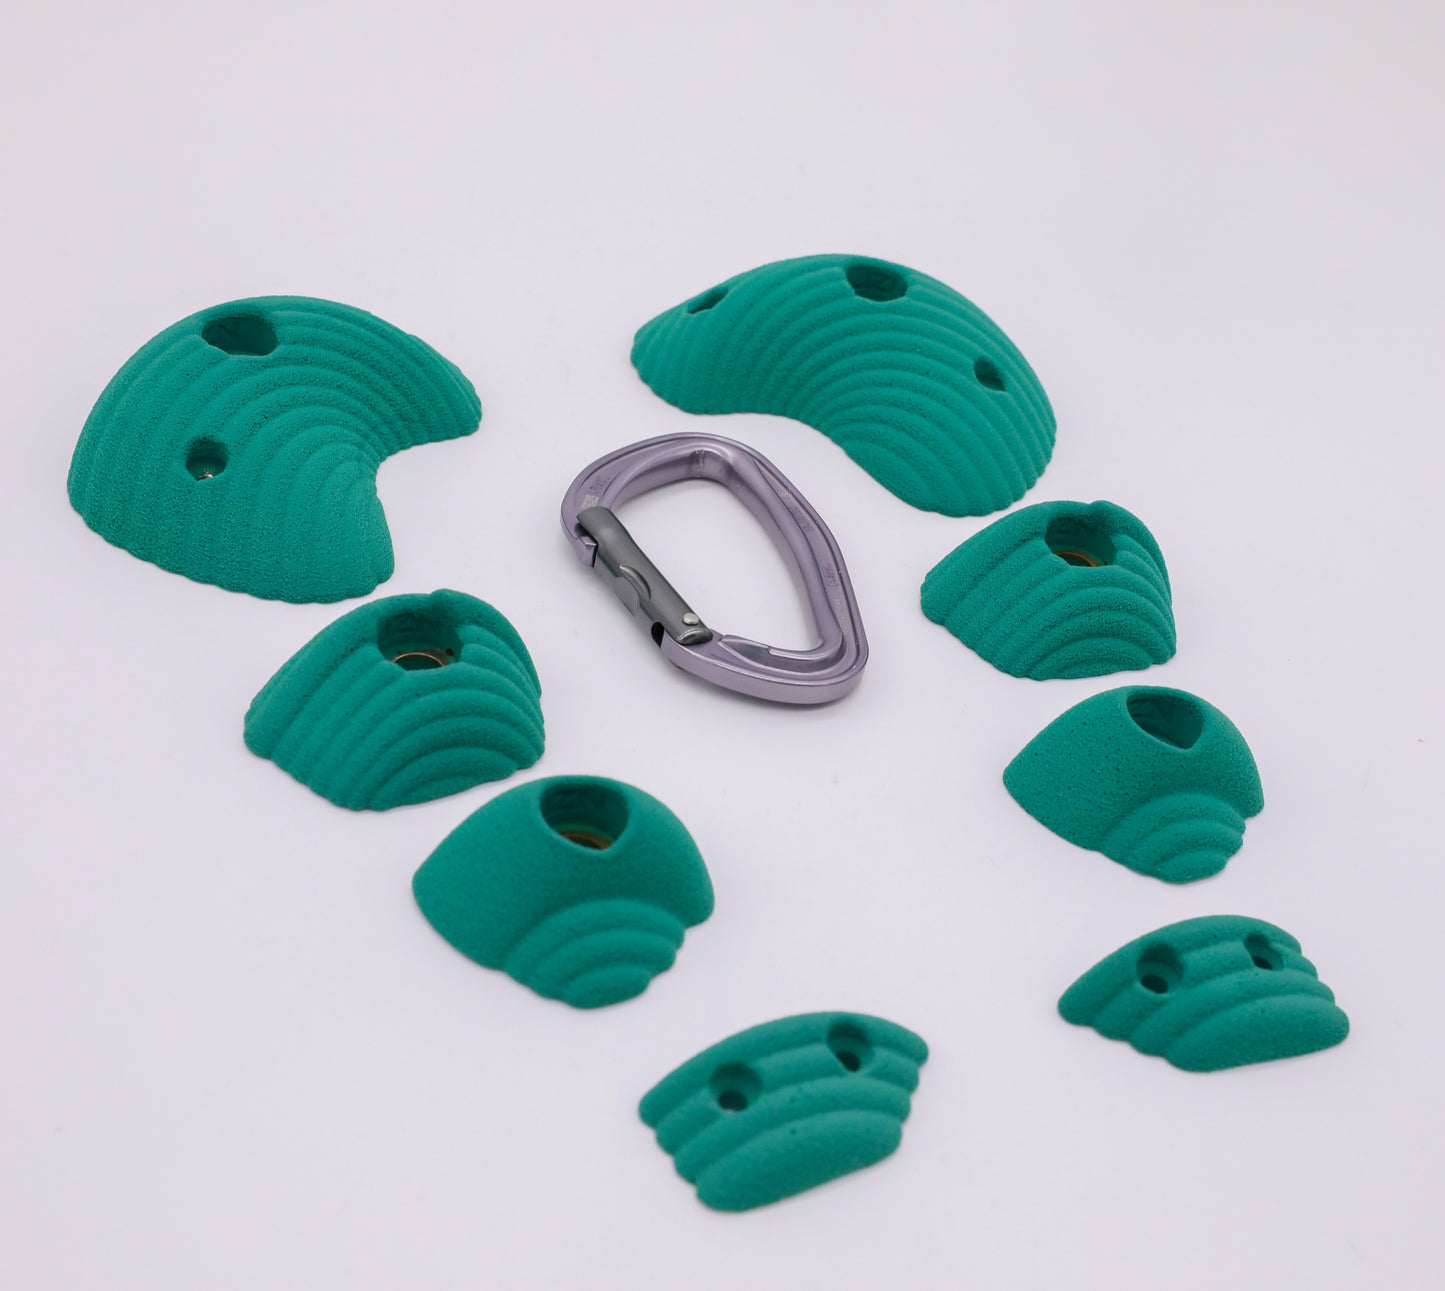 Bolt On Climbing Holds, Swarm Foot Holds Set